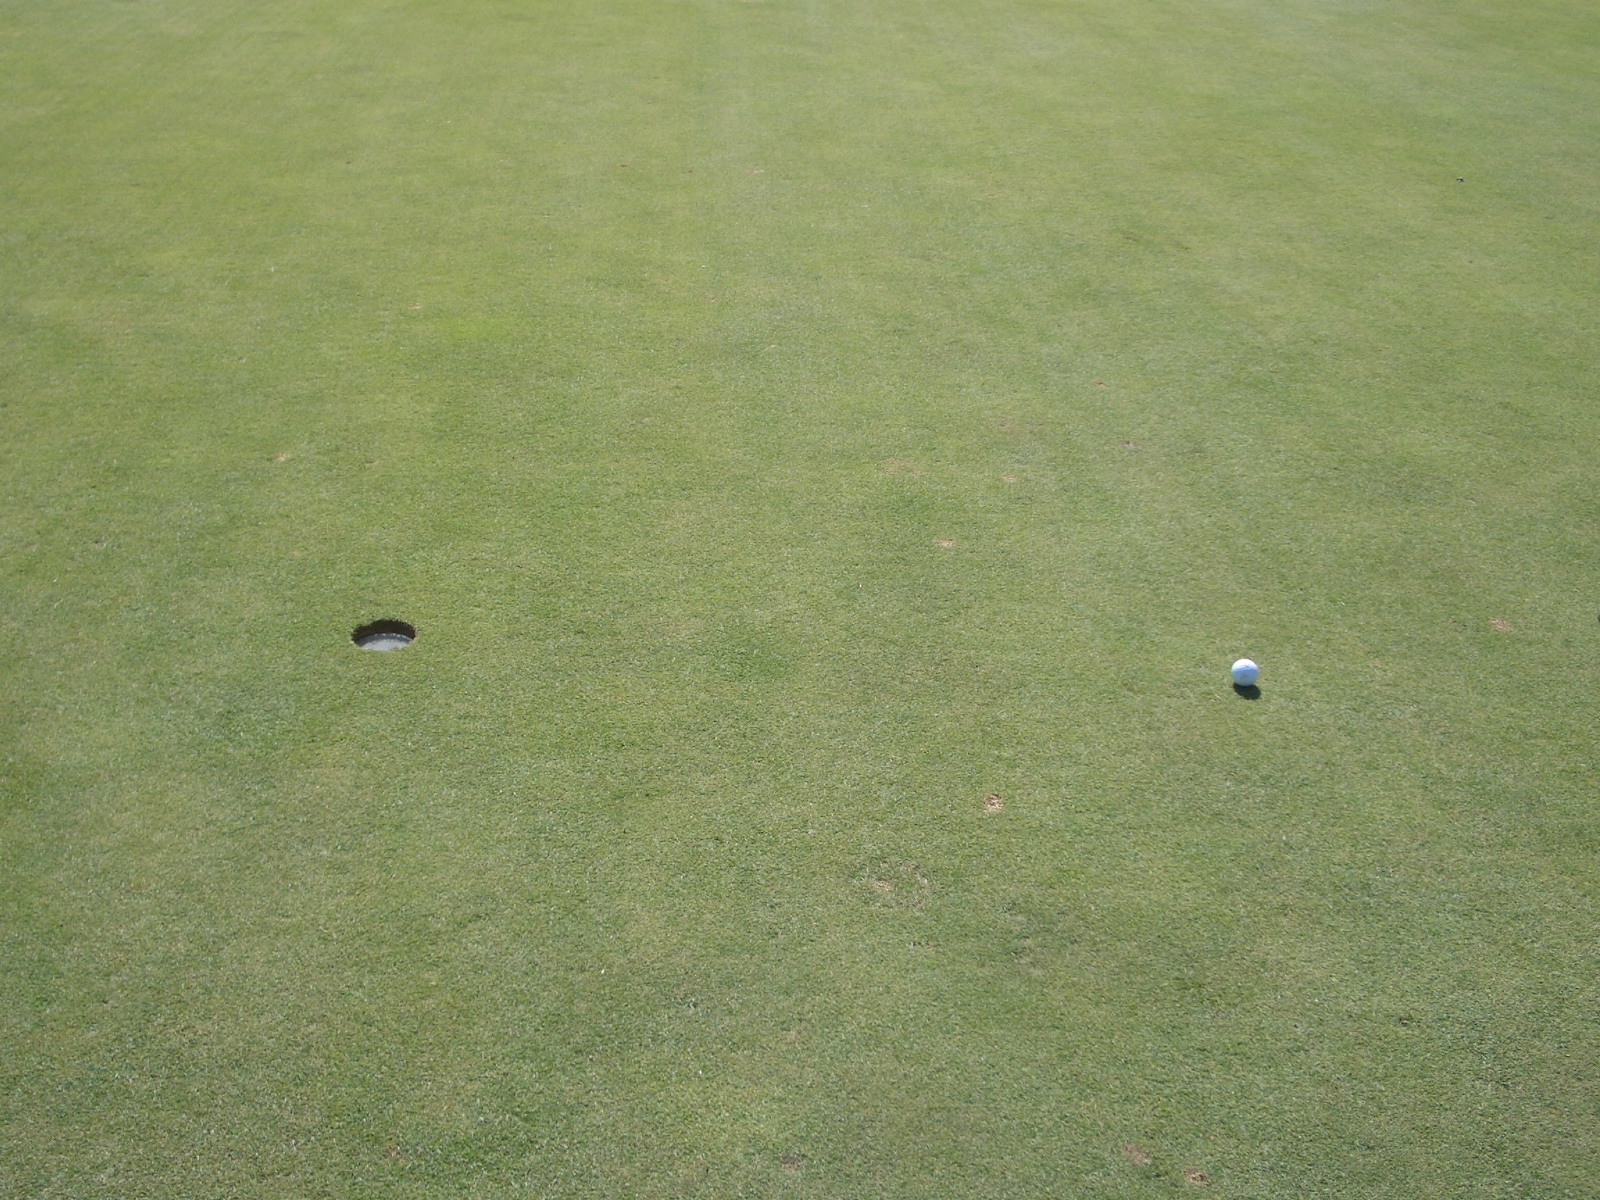 two ball and tee balls laying on a grass field